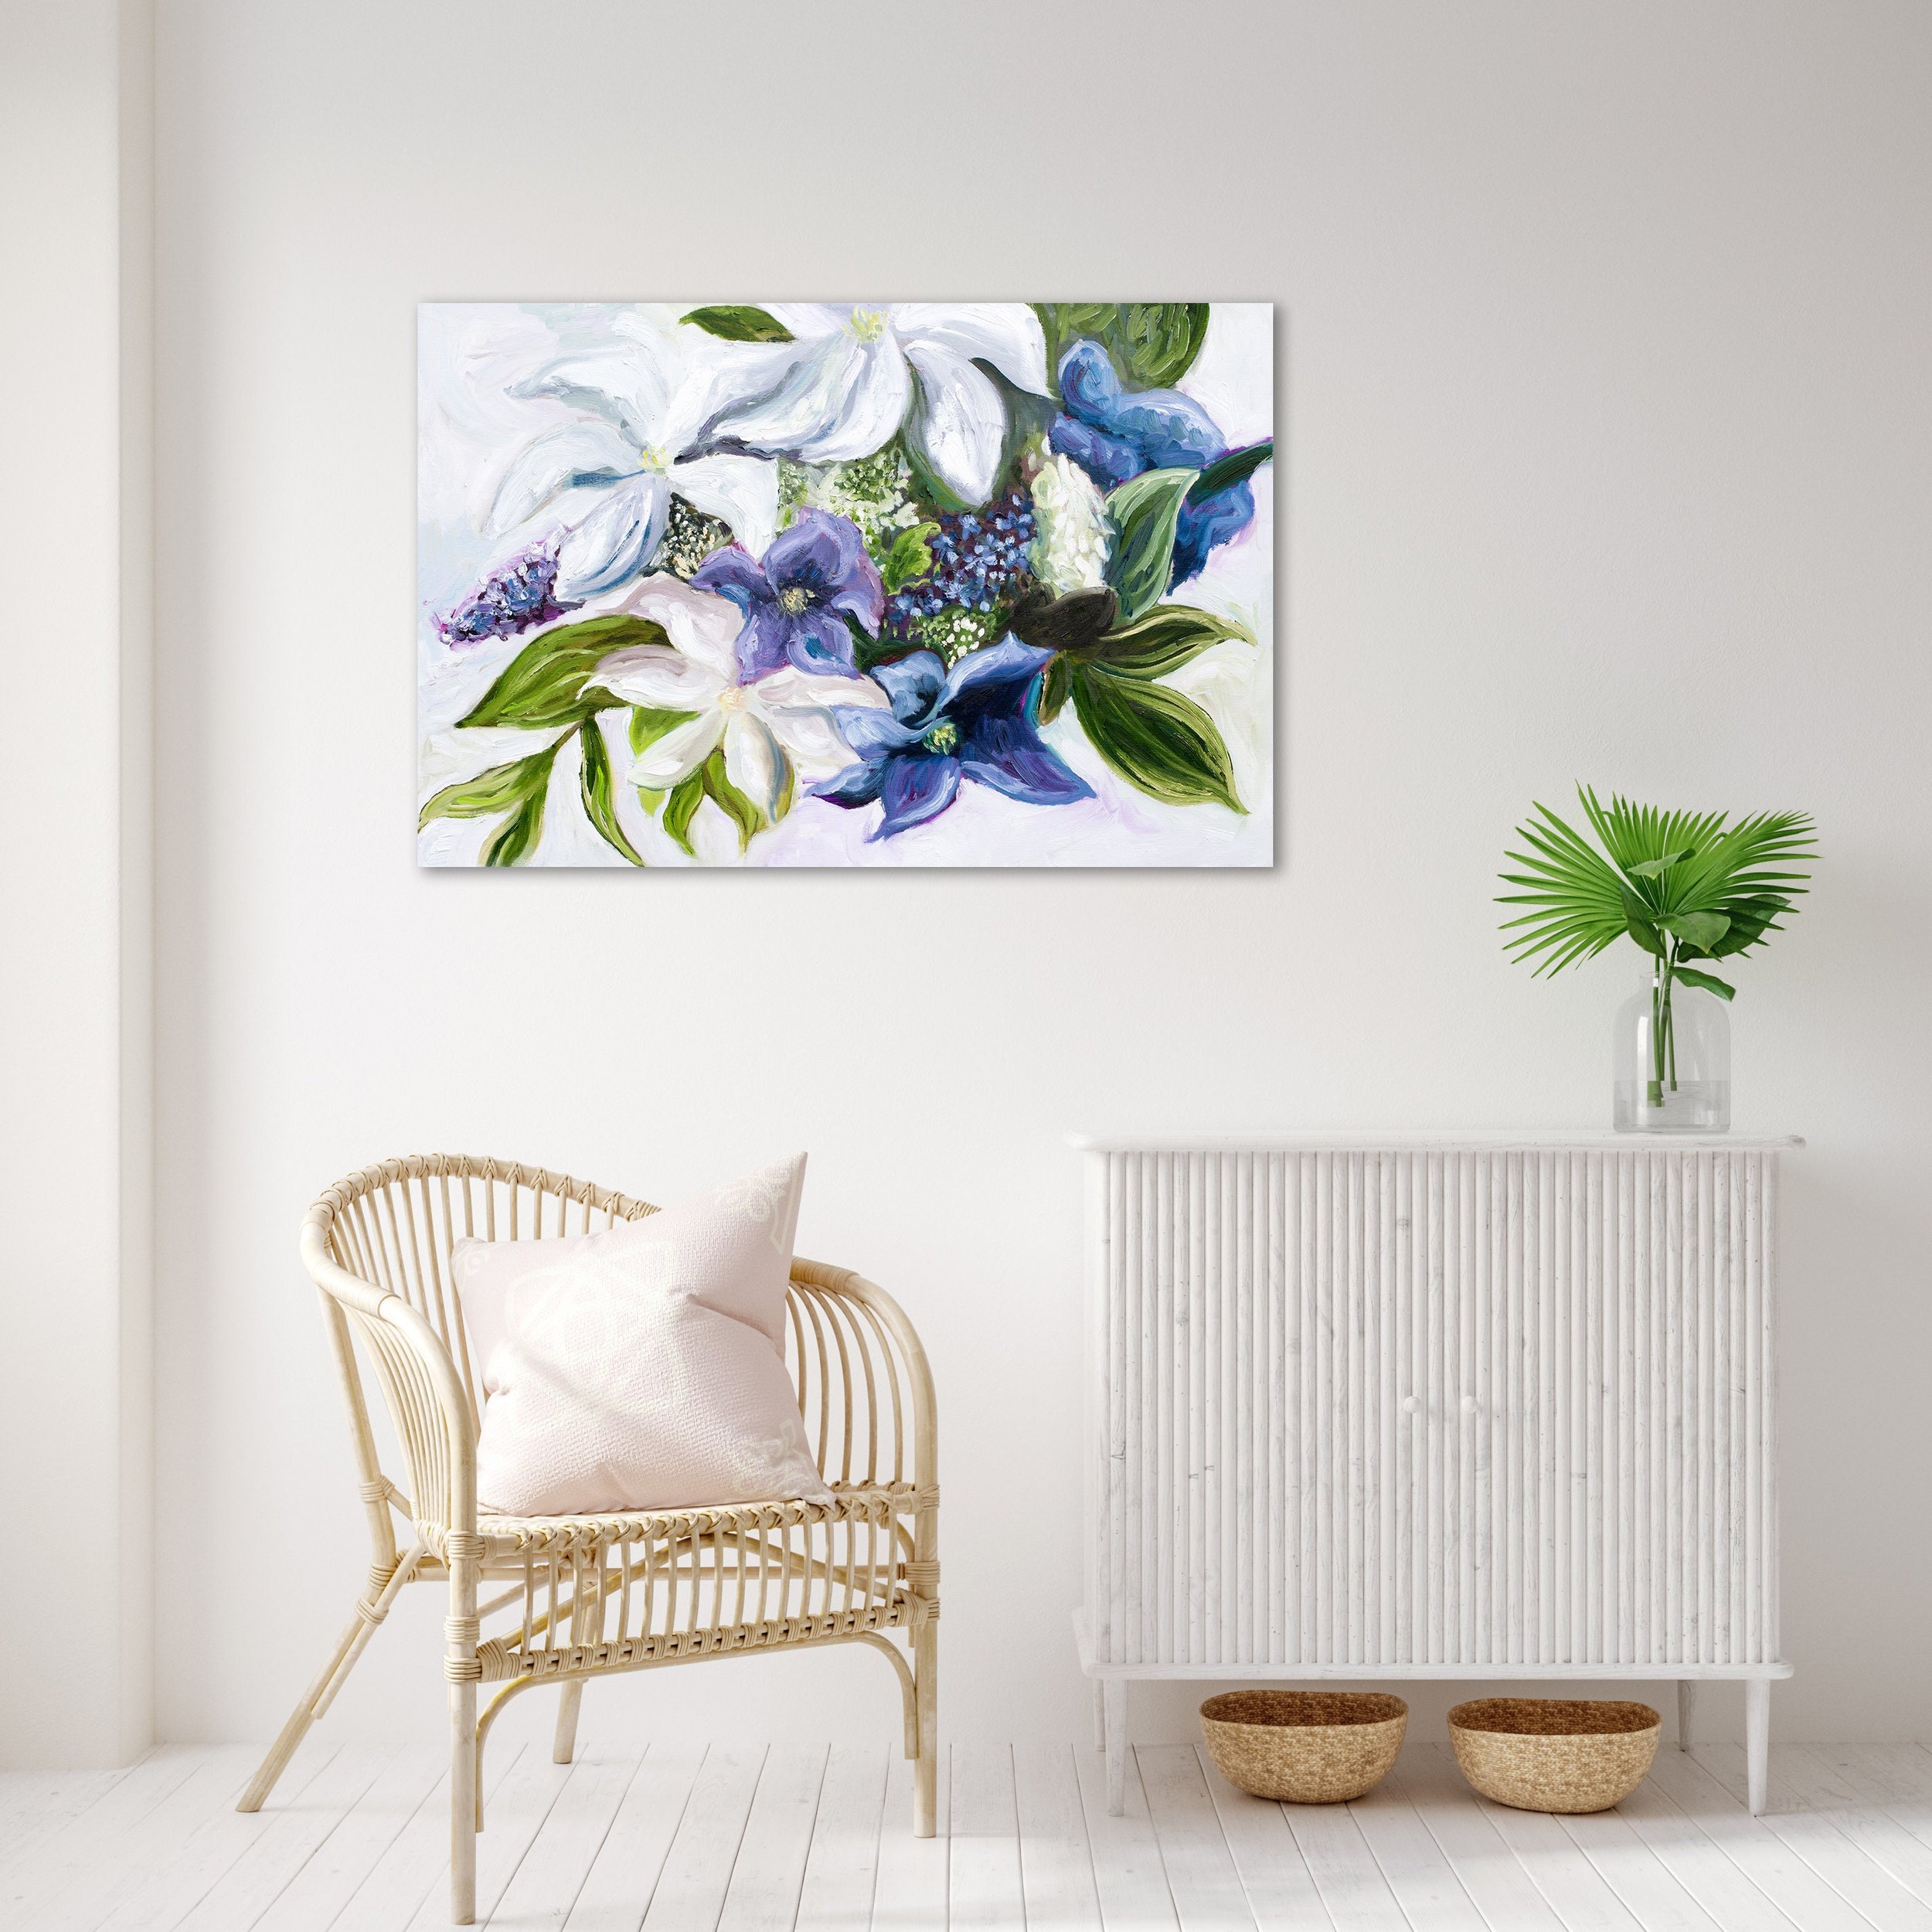 Floral Oil Painting Art Catching My Breath 24x36 Canvas by Katie Jobling  — Katie Jobling